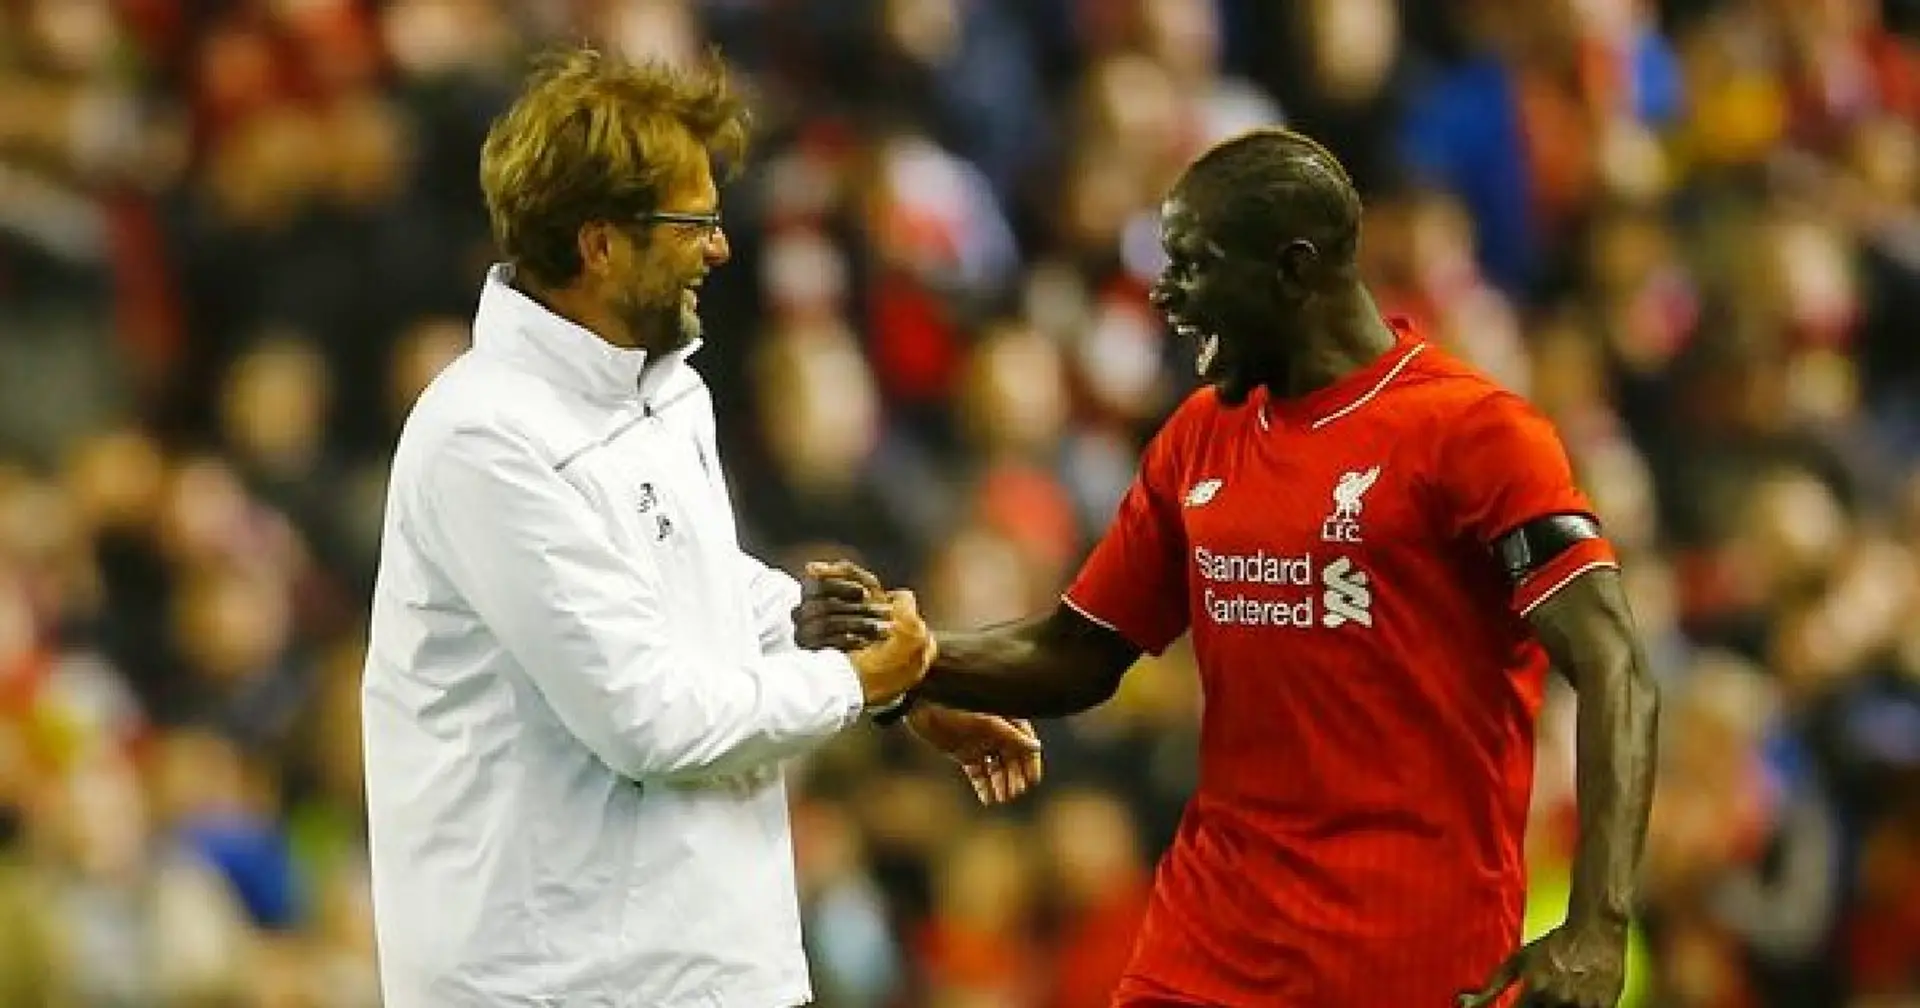 'I’m really happy for Mama': Klopp responds to Sakho receiving apology from WADA over false doping allegations